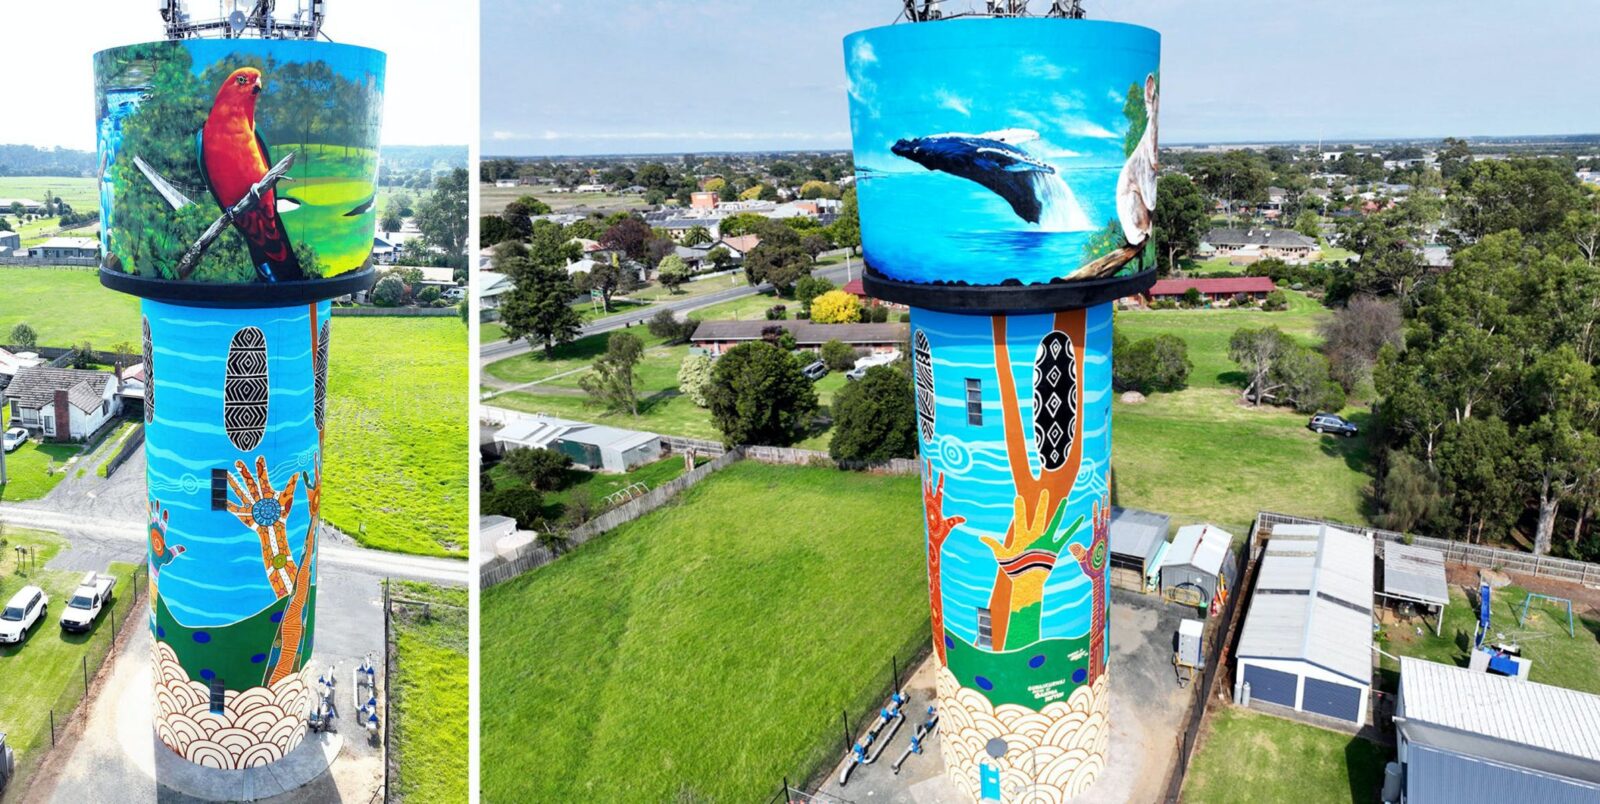 This is the 25th and the biggest official mural in the town of Yarram.